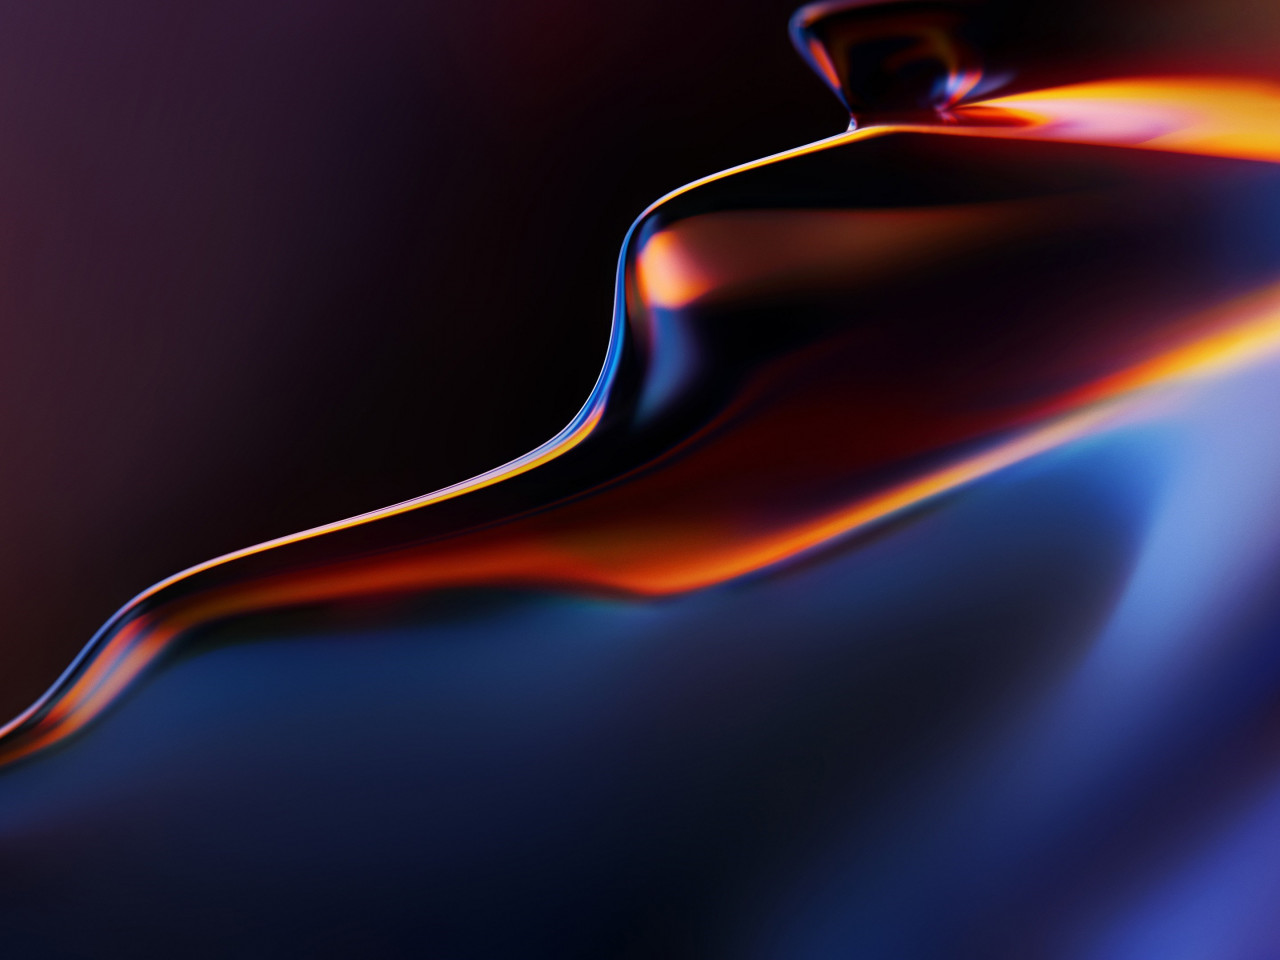 Abstract, flow, OnePlus 6T wallpaper 1280x960